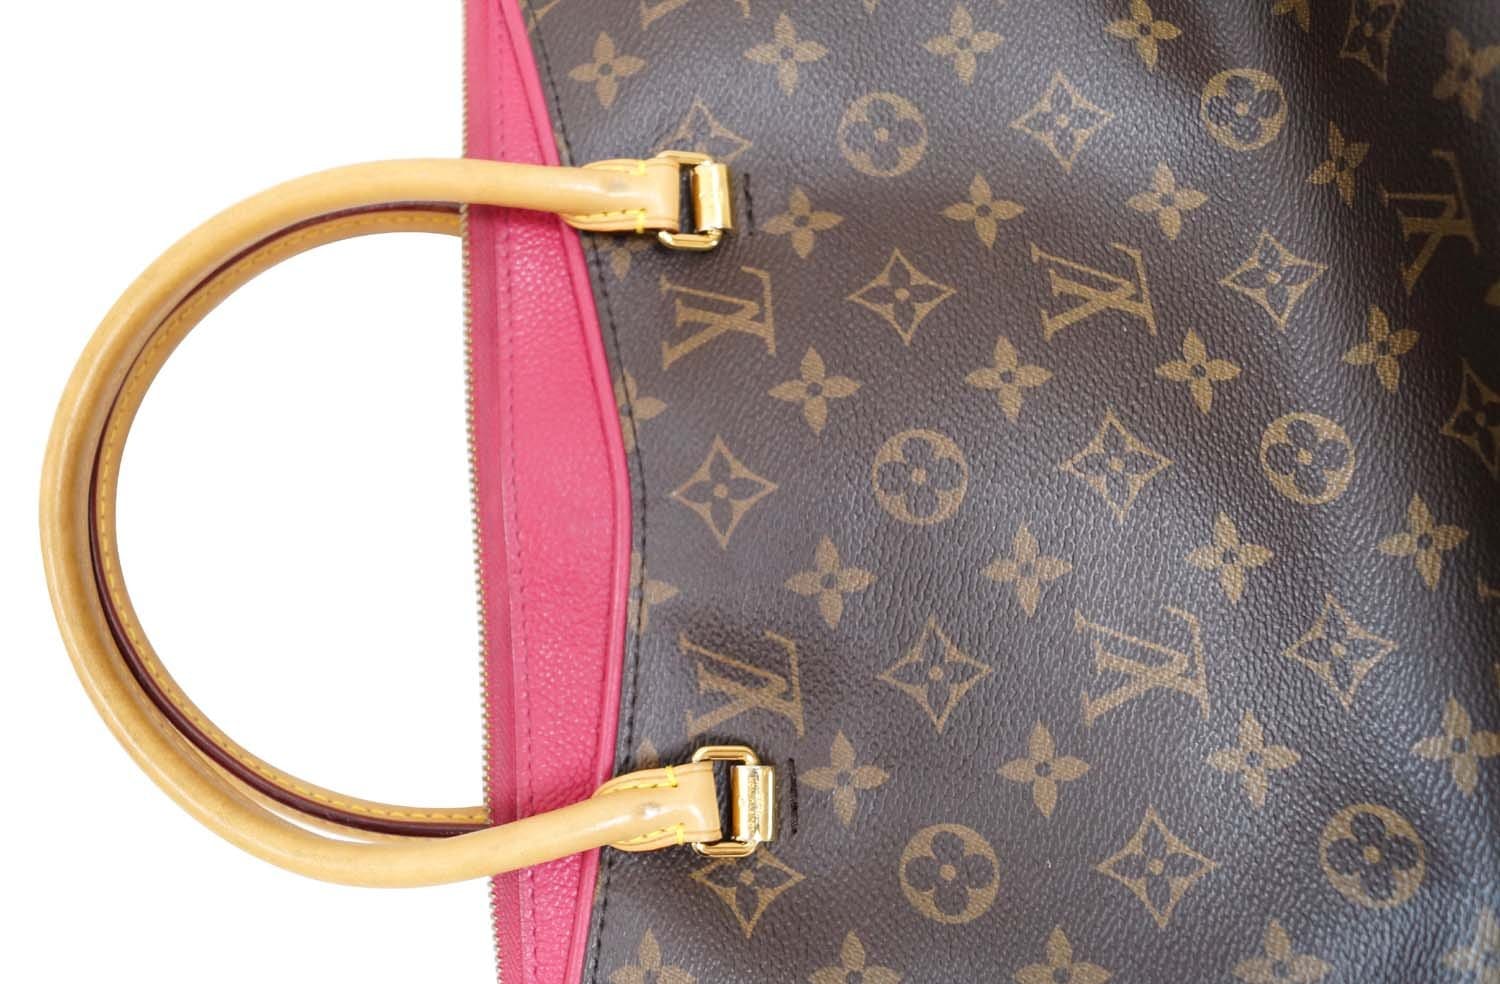 HOW TO CLEAN THE LOUIS VUITTON CANVAS AND COWHIDE